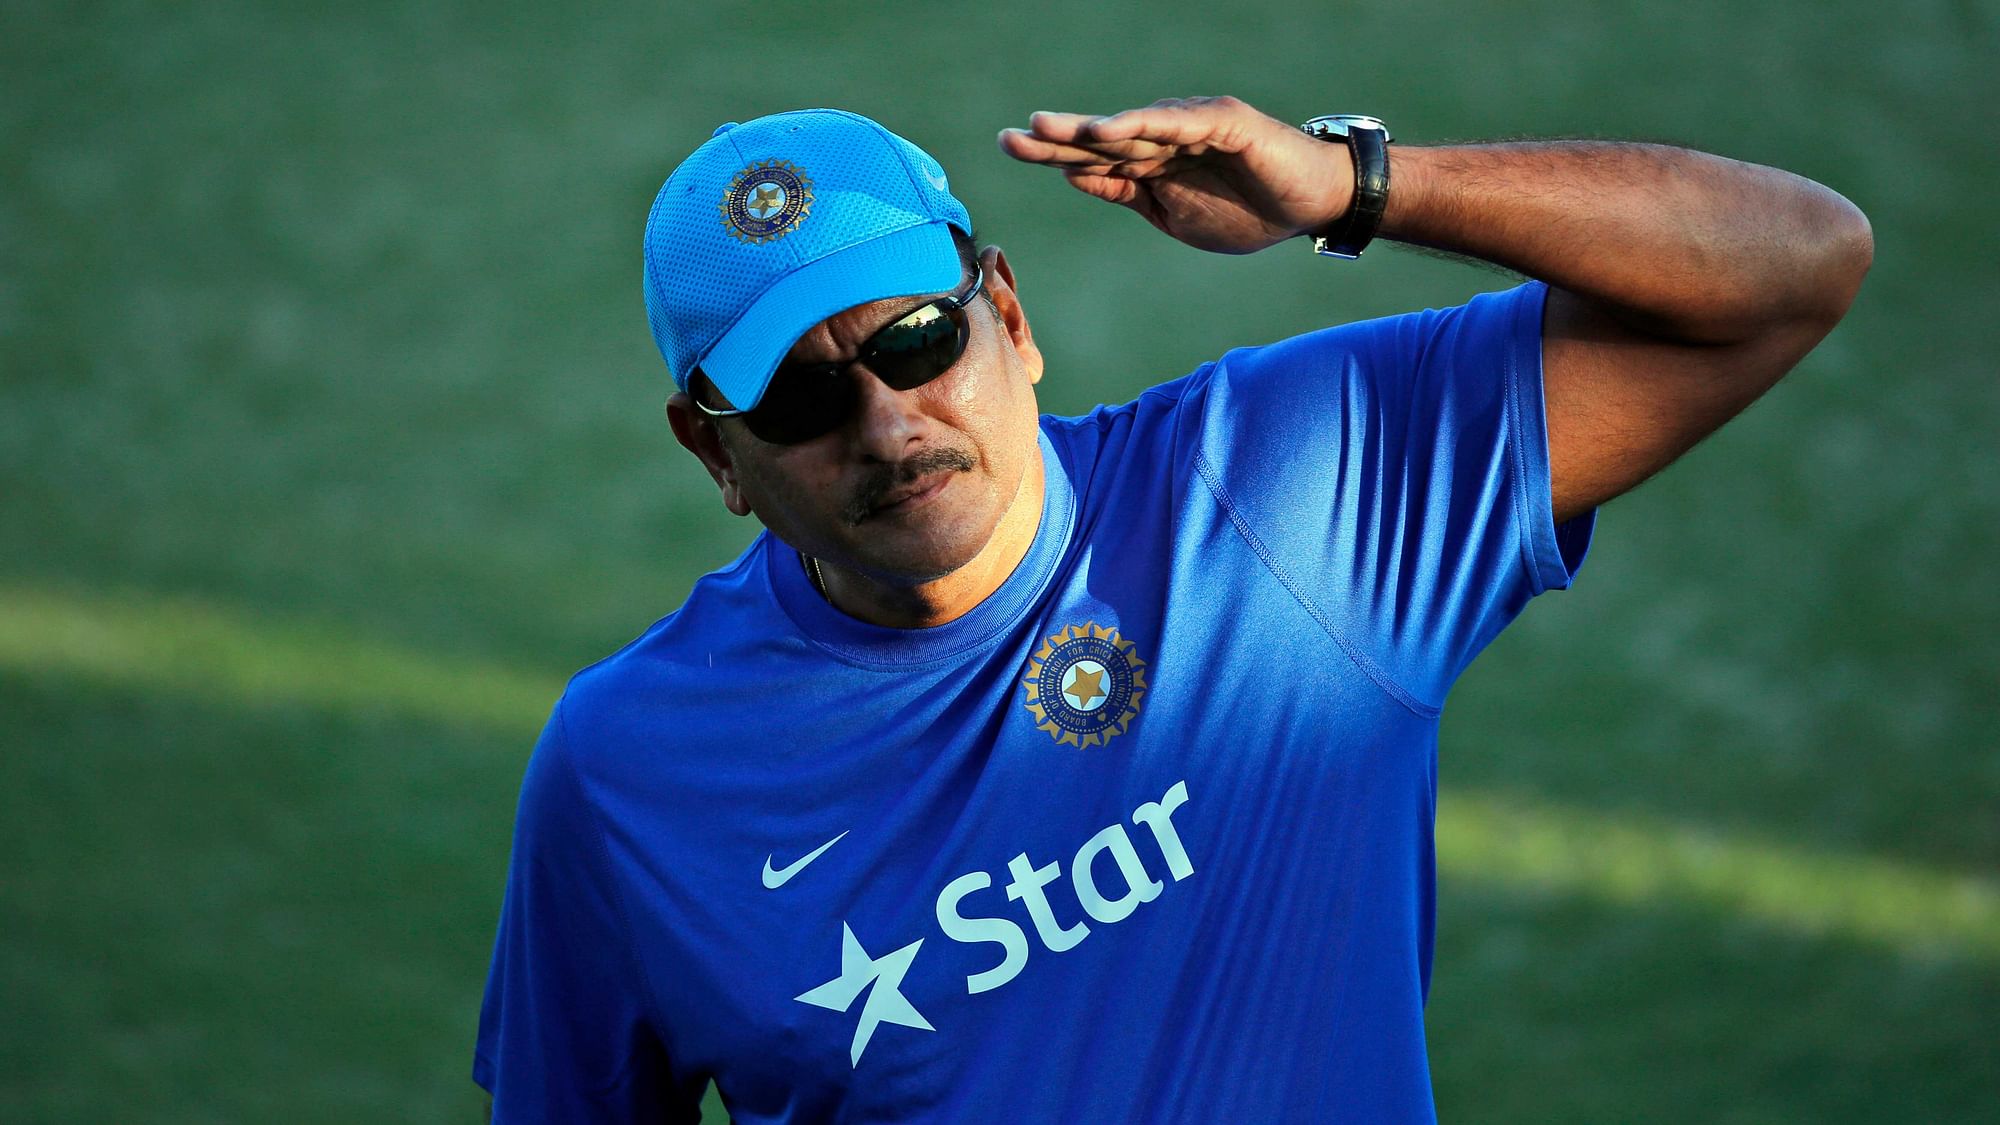 Ravi Shastri’s tenure as India coach started on 18 July.